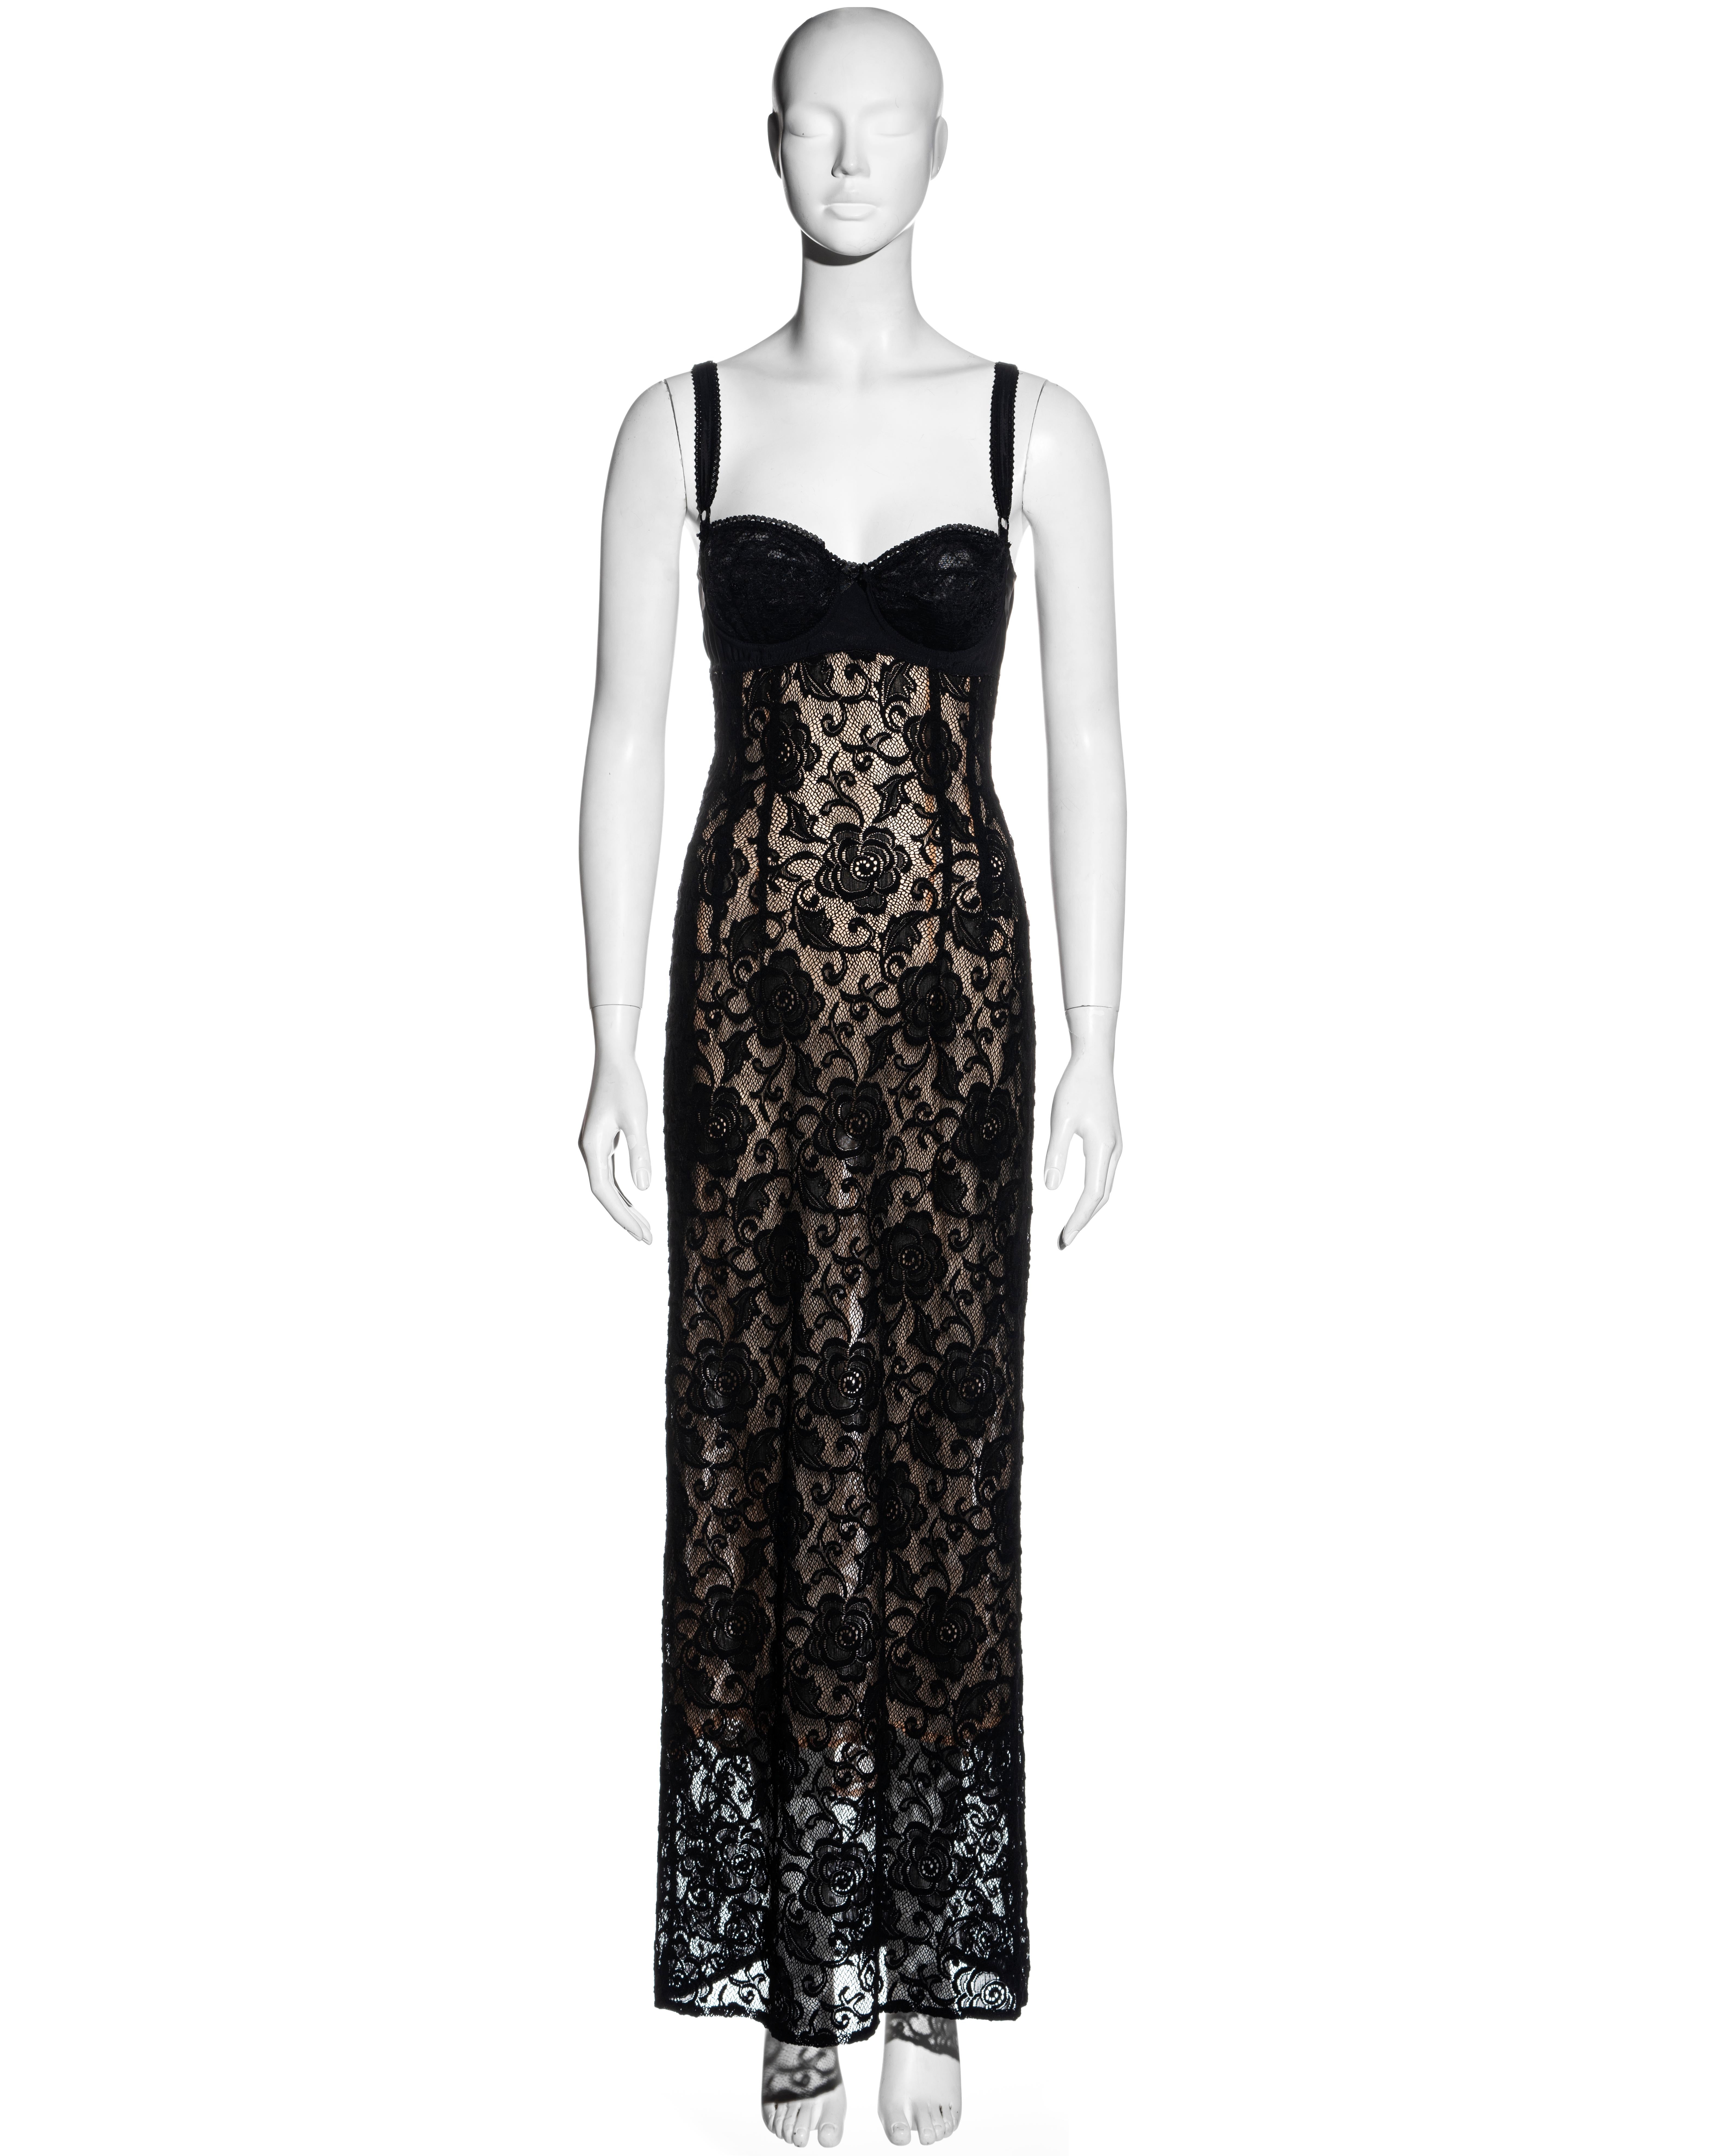 ▪ Dolce & Gabbana black lace maxi dress 
▪ Attached bra with spandex band and adjustable shoulder straps
▪ Nude silk chiffon lining 
▪ Cut-out back  
▪ Concealed zip fastening  
▪ IT 42 - FR 38 - UK 10 - US 6
▪ 50% Silk, 48% Nylon, 2% Elastane 
▪